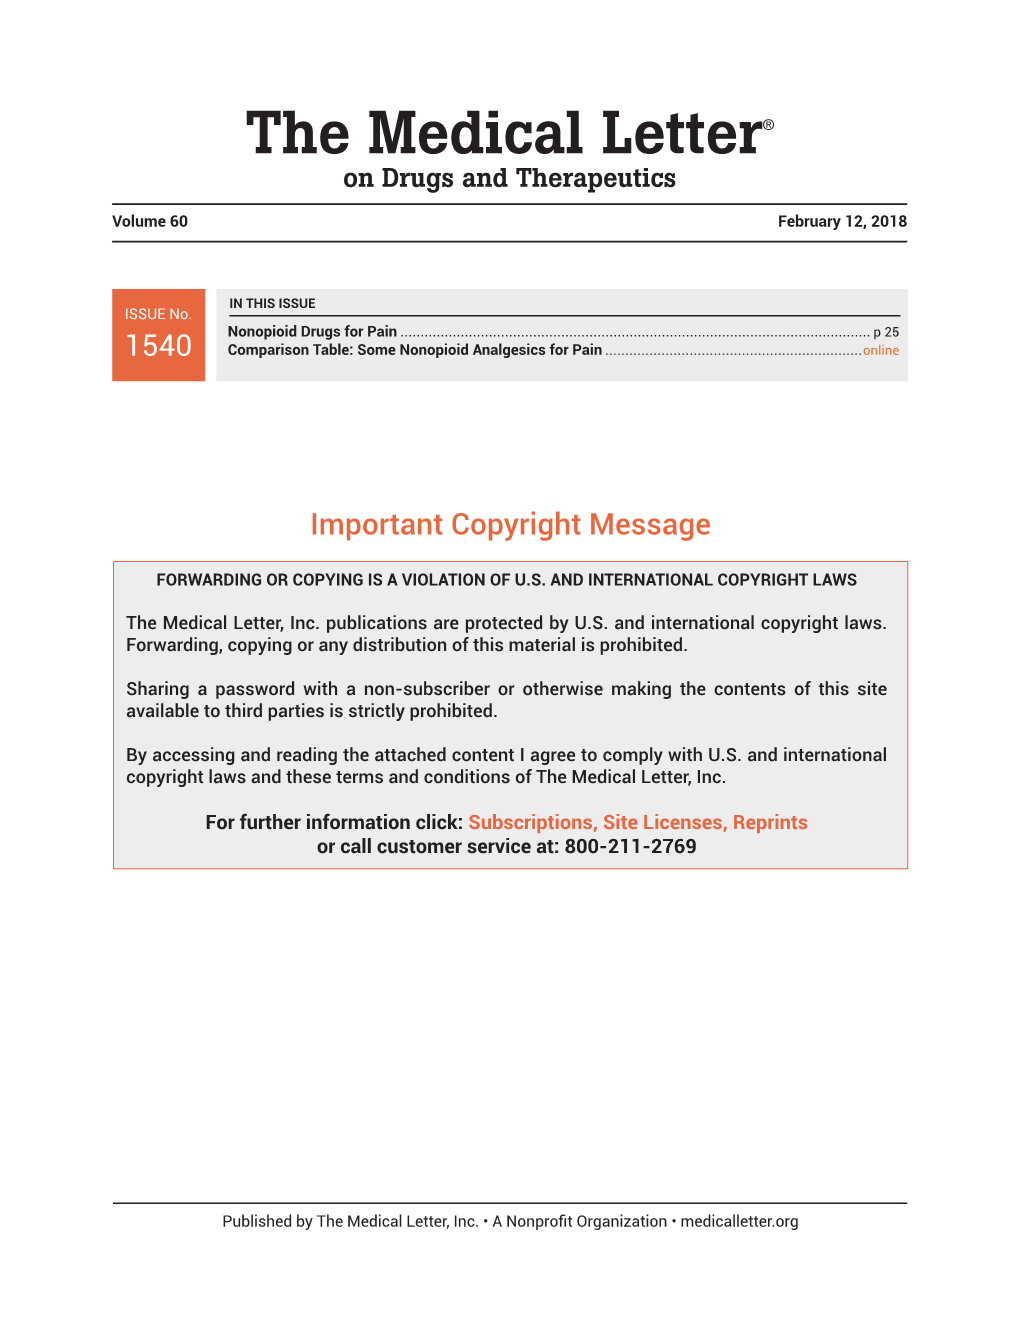 The Medical Letter® on Drugs and Therapeutics